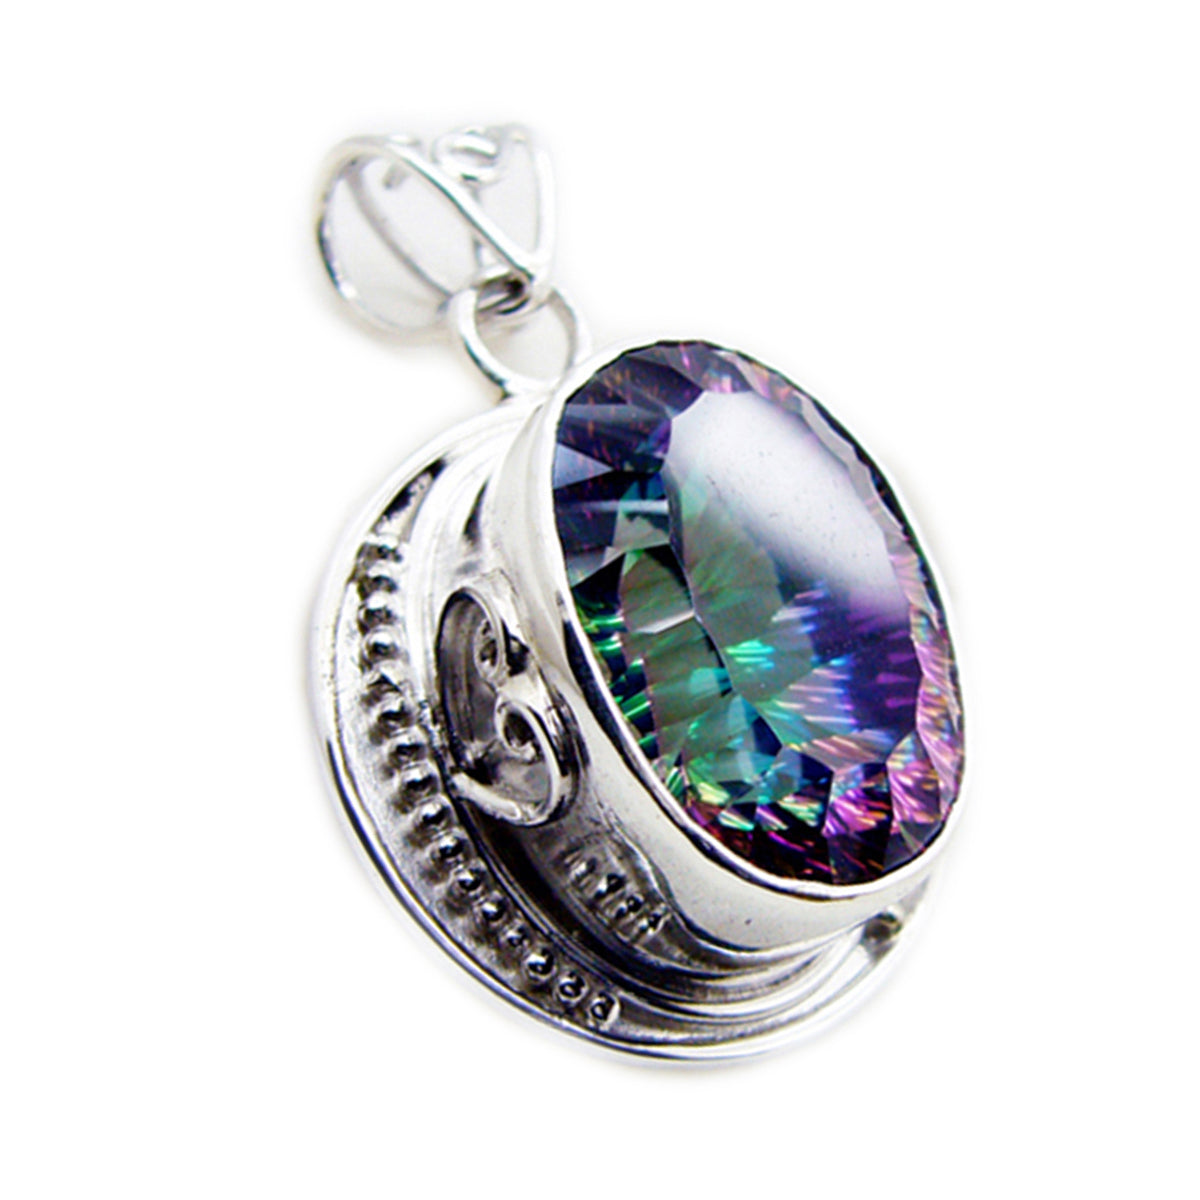 Riyo Comely Gemstone Oval Faceted Multi Color Mystic Quartz 1171 Sterling Silver Pendant Gift For Teachers Day